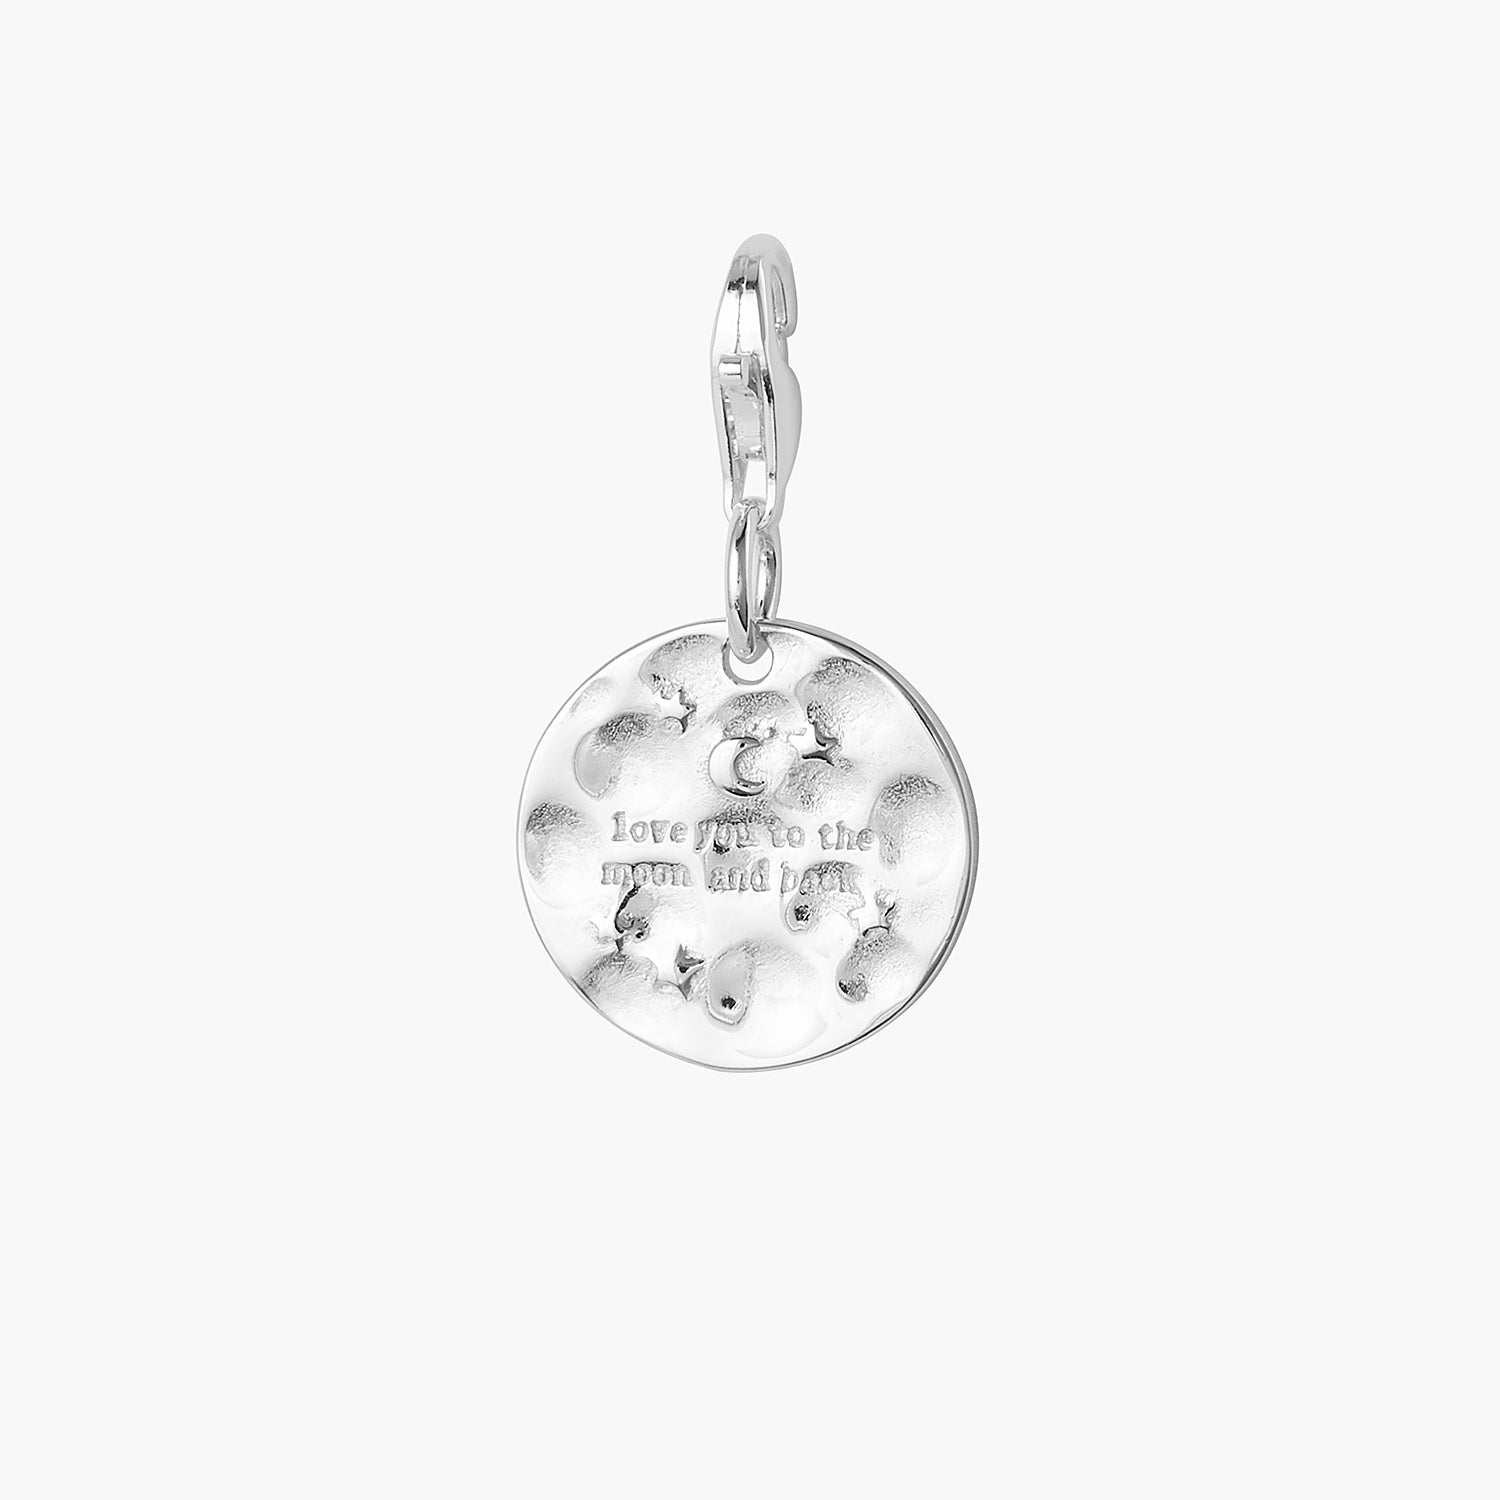 Love You To The Moon & Back Charm Pendant